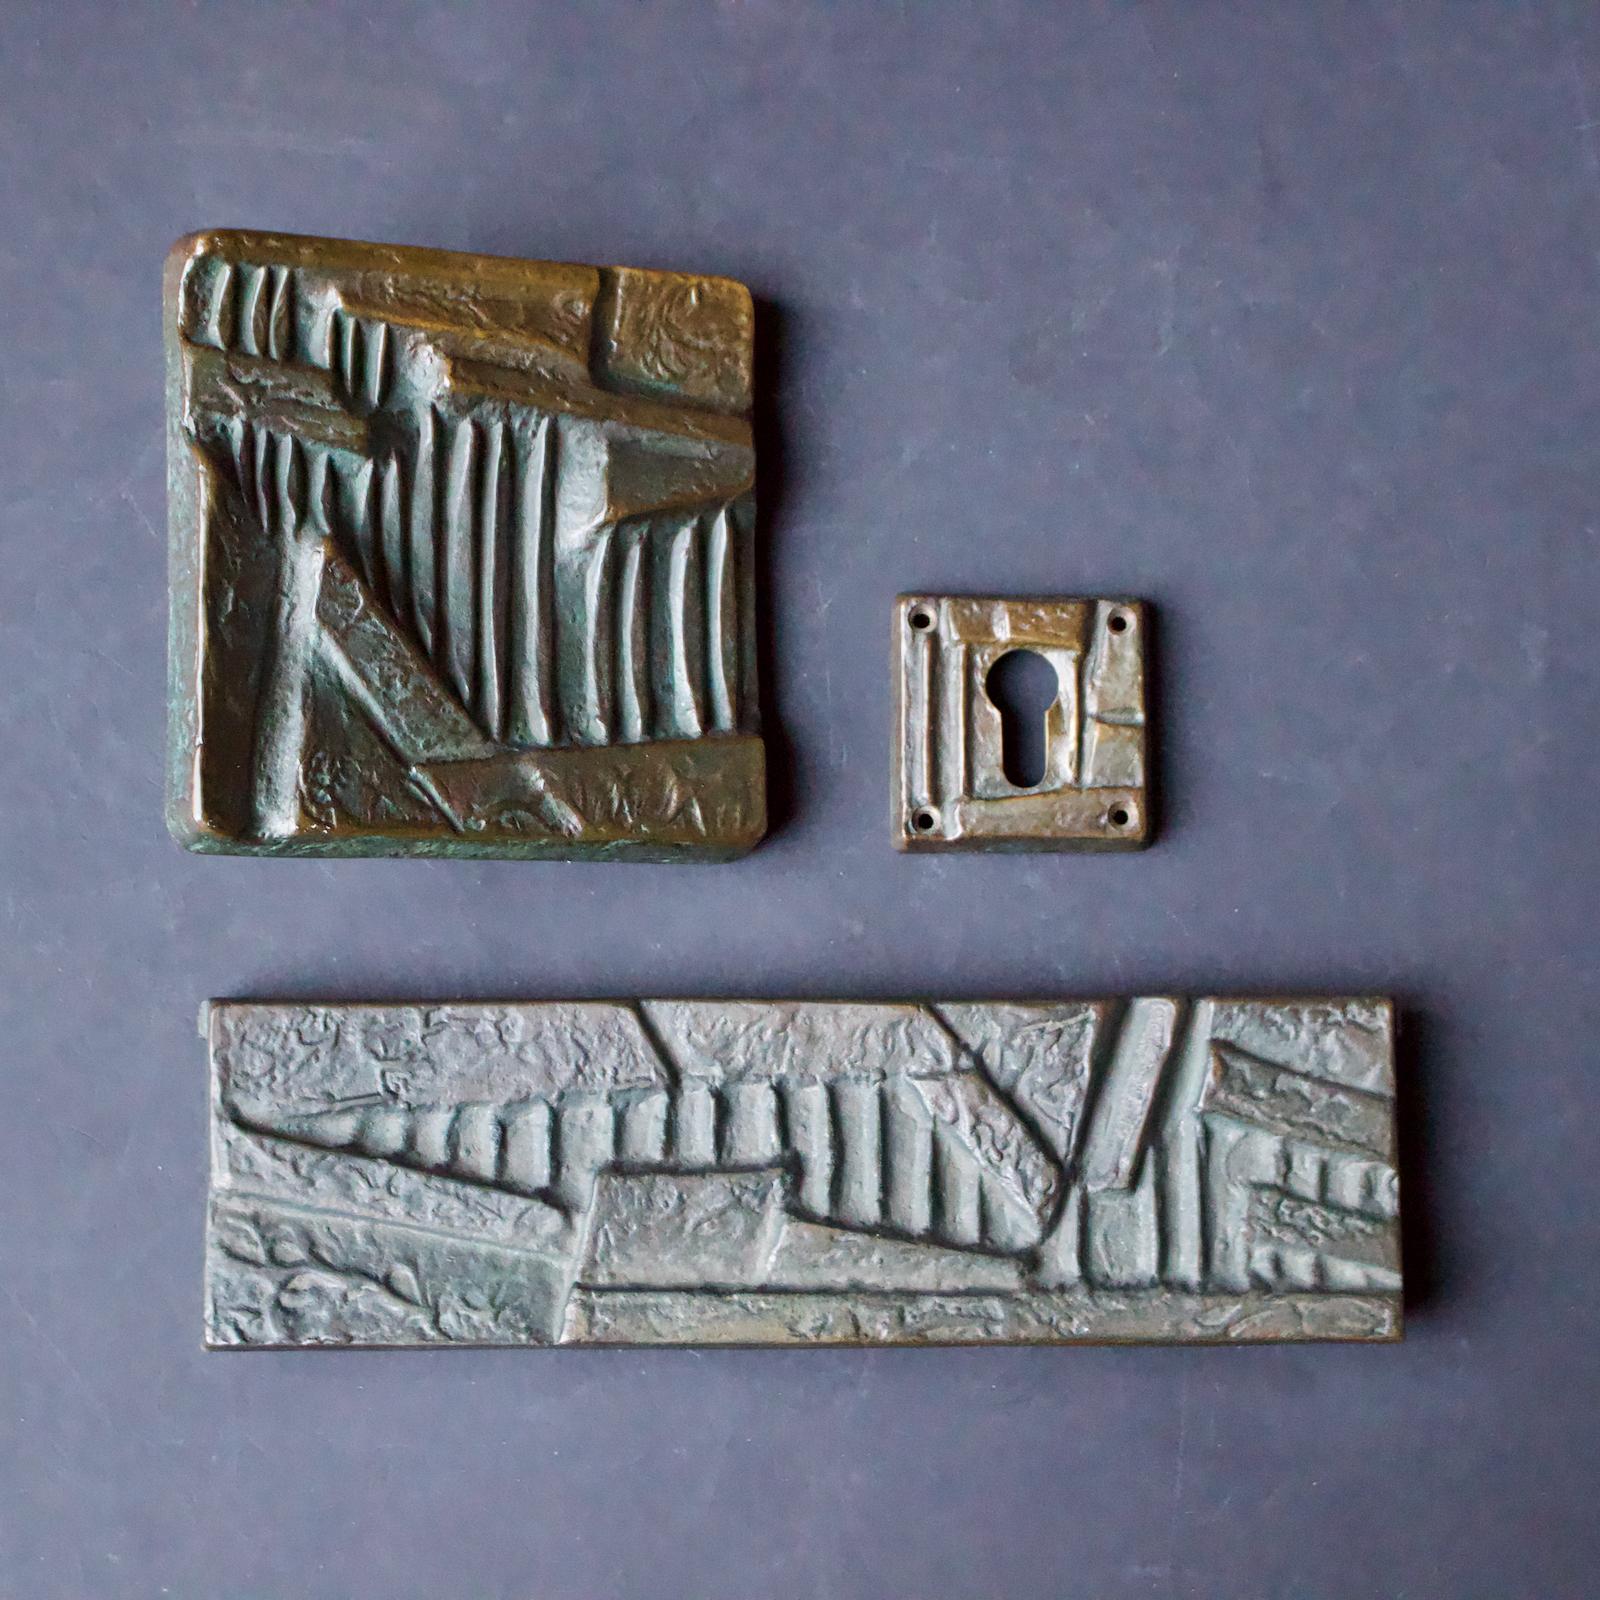 A square Brutalist bronze door handle with abstract design, together with matching letterbox cover and keyhole plate. European, second half of the 20th century - we would guess 1970s.

The items in this set have been left as found. They have lots